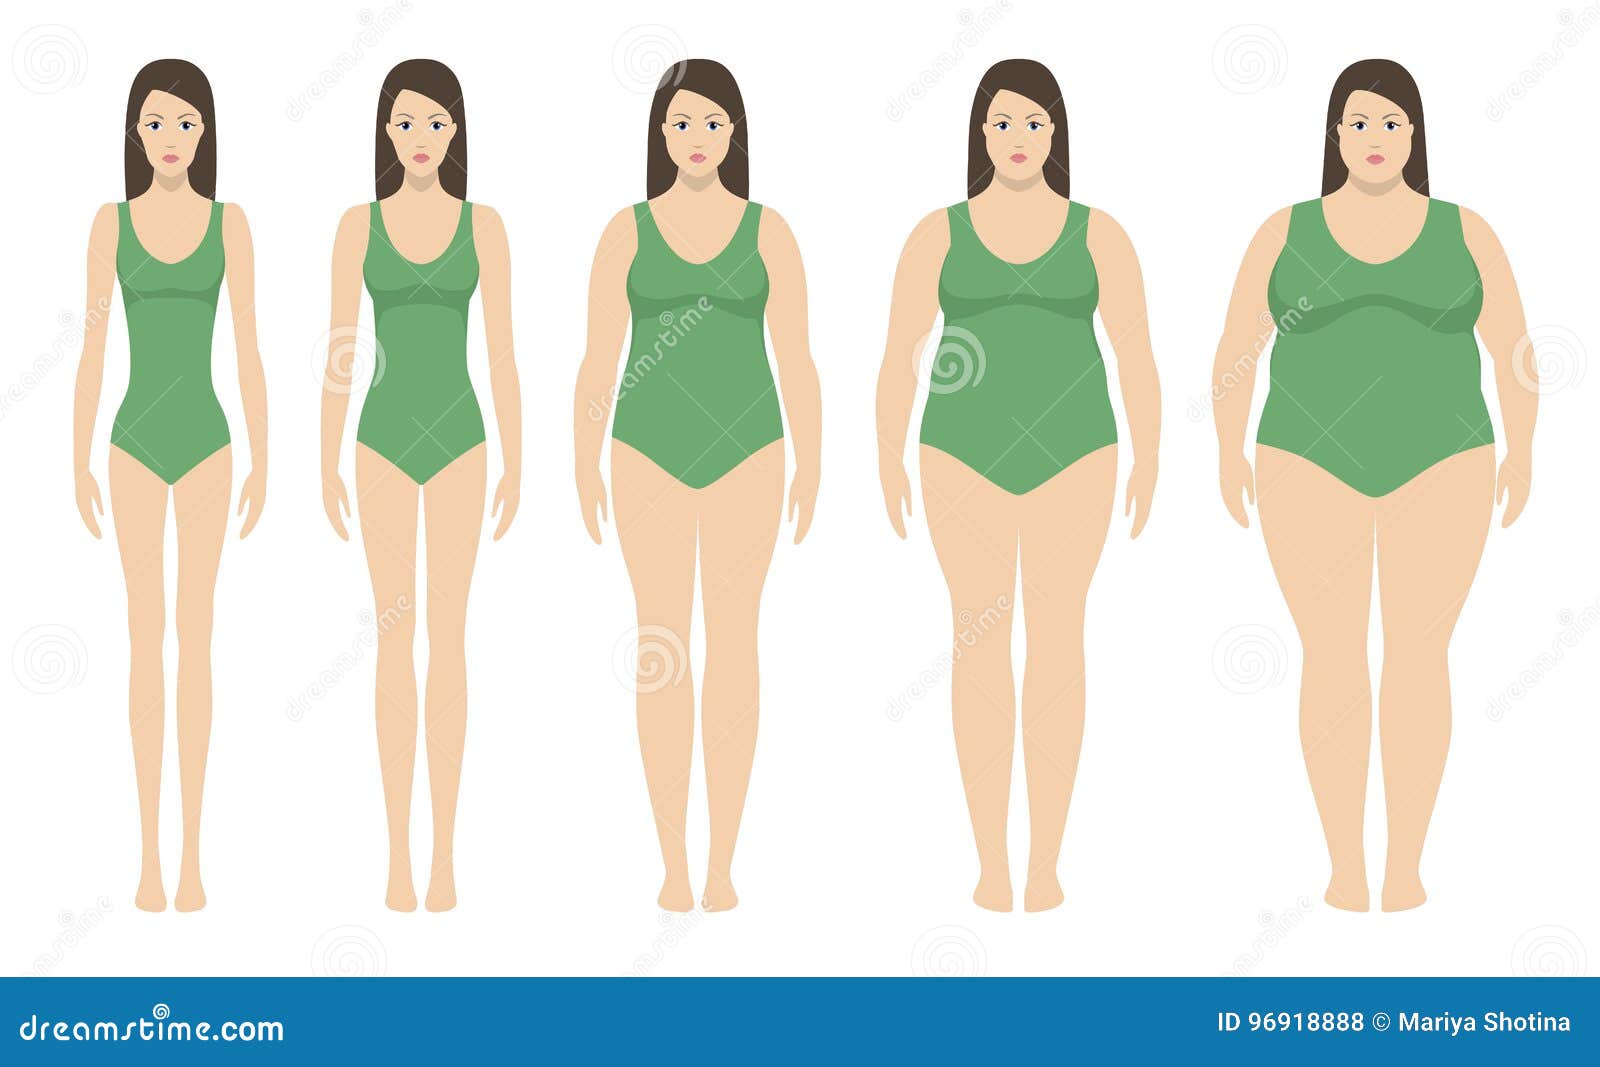 body mass index   from underweight to extremly obese. woman silhouettes with different obesity degrees.